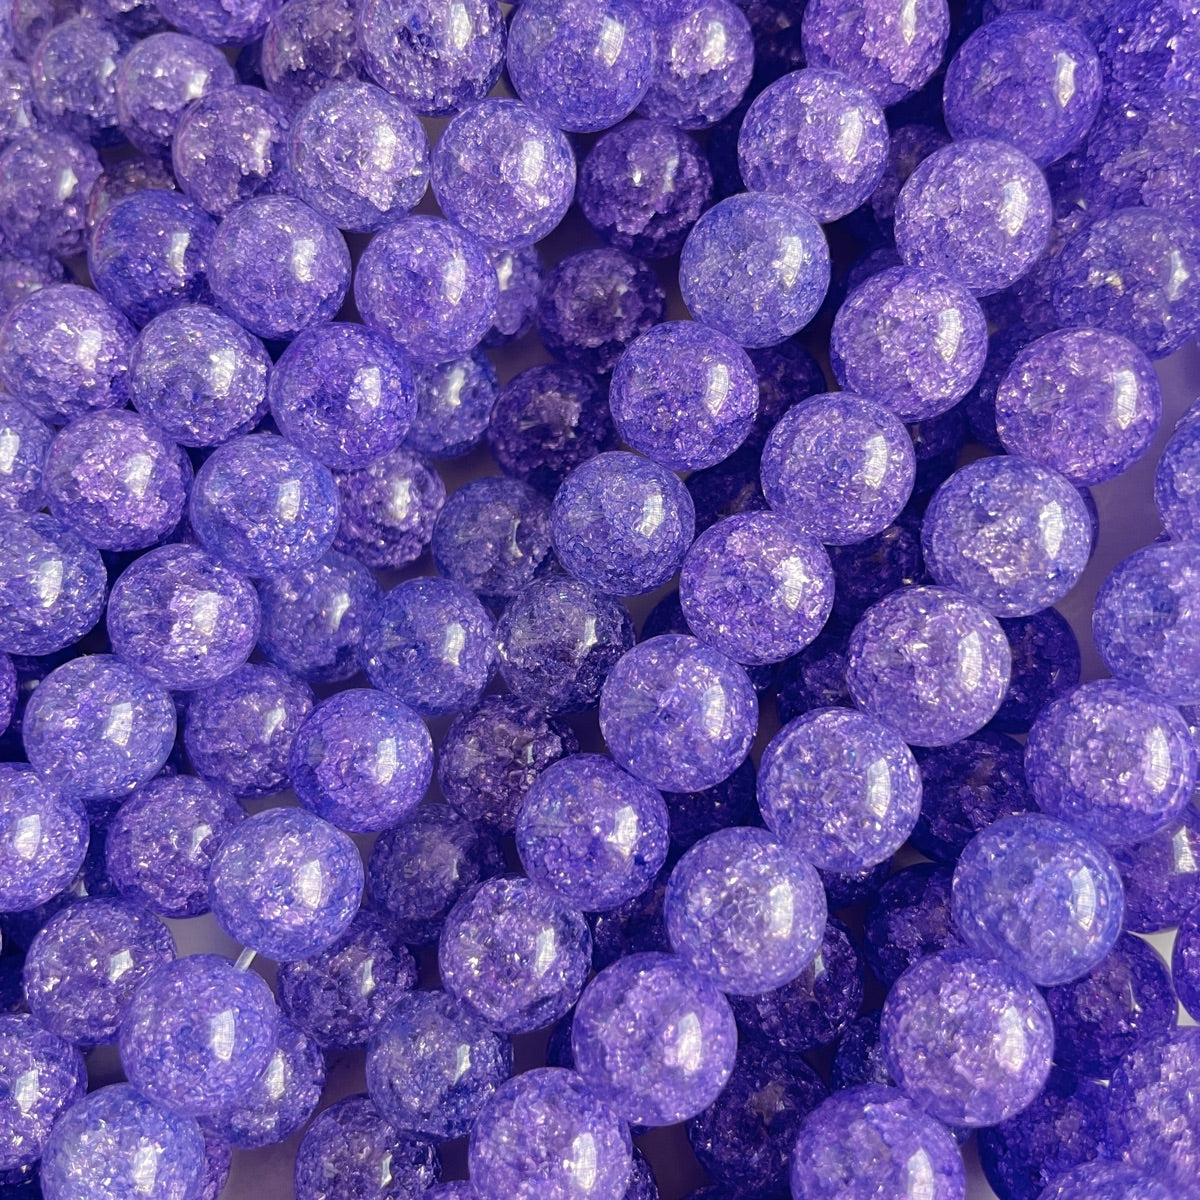 2 Strands/lot 10mm Colorful Popcorn Crystal Round Beads Purple Stone Beads New Beads Arrivals Other Stone Beads Charms Beads Beyond